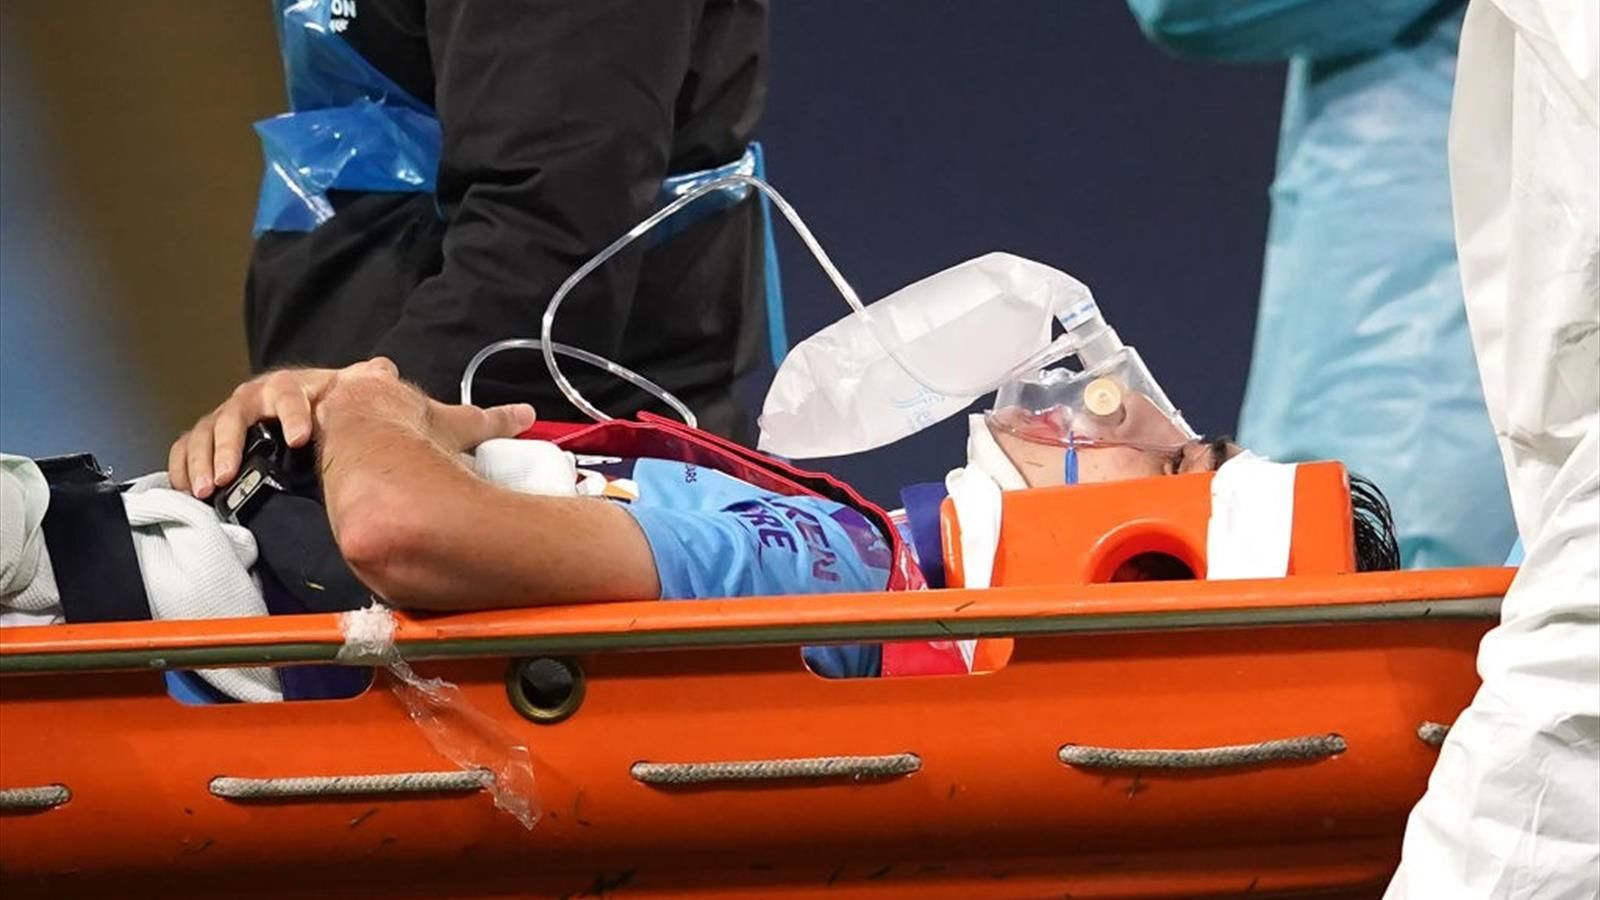 Eric Garcia was released from hospital after being in a collision